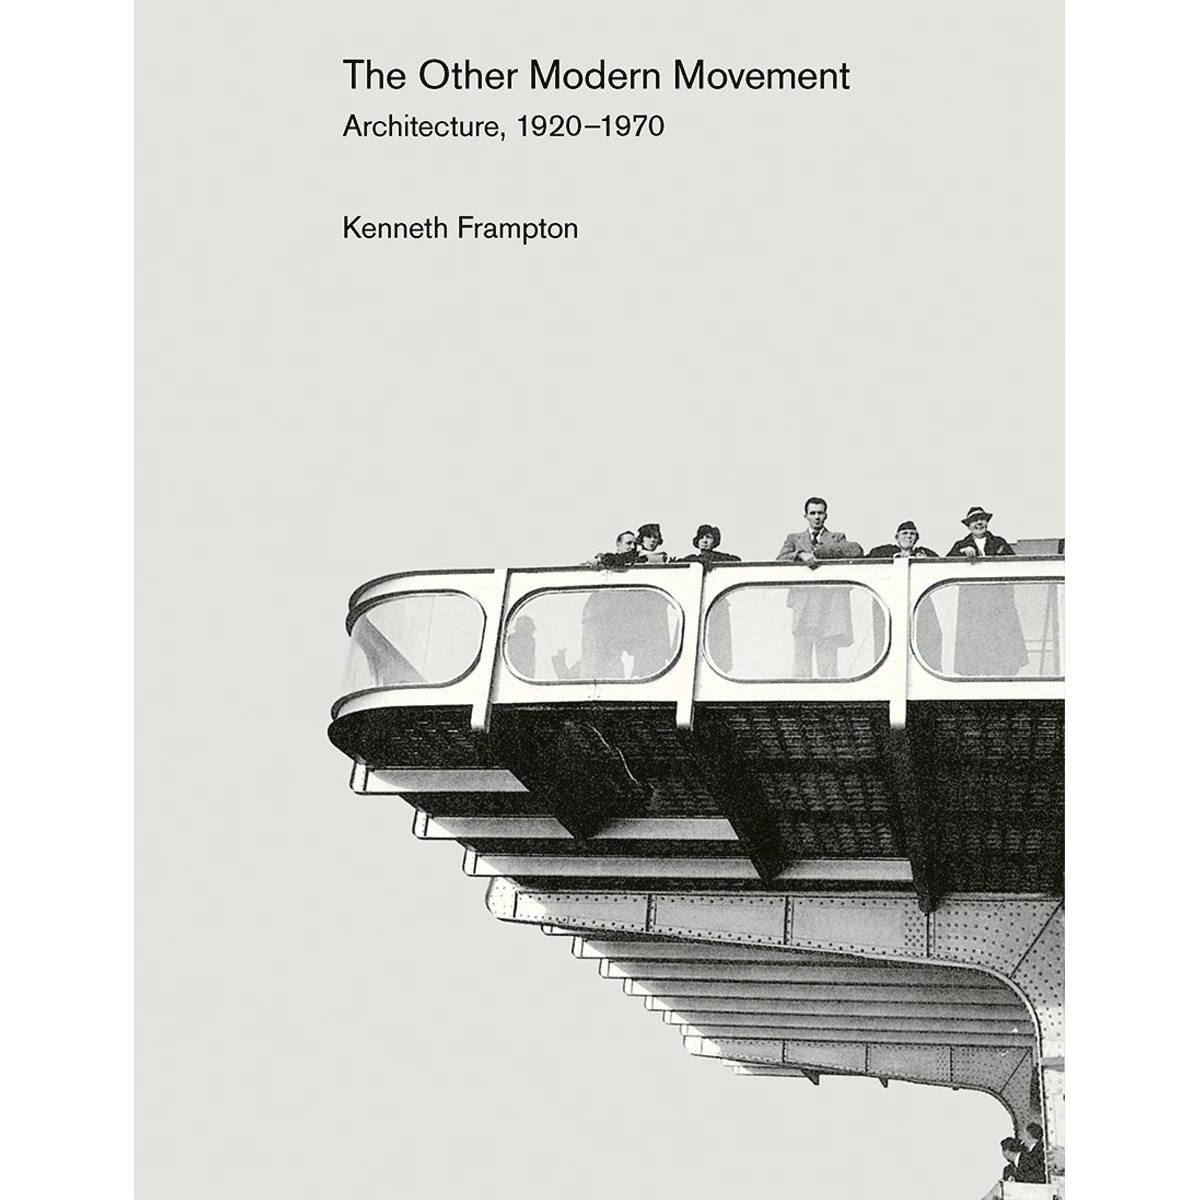 The Other Modern Movement